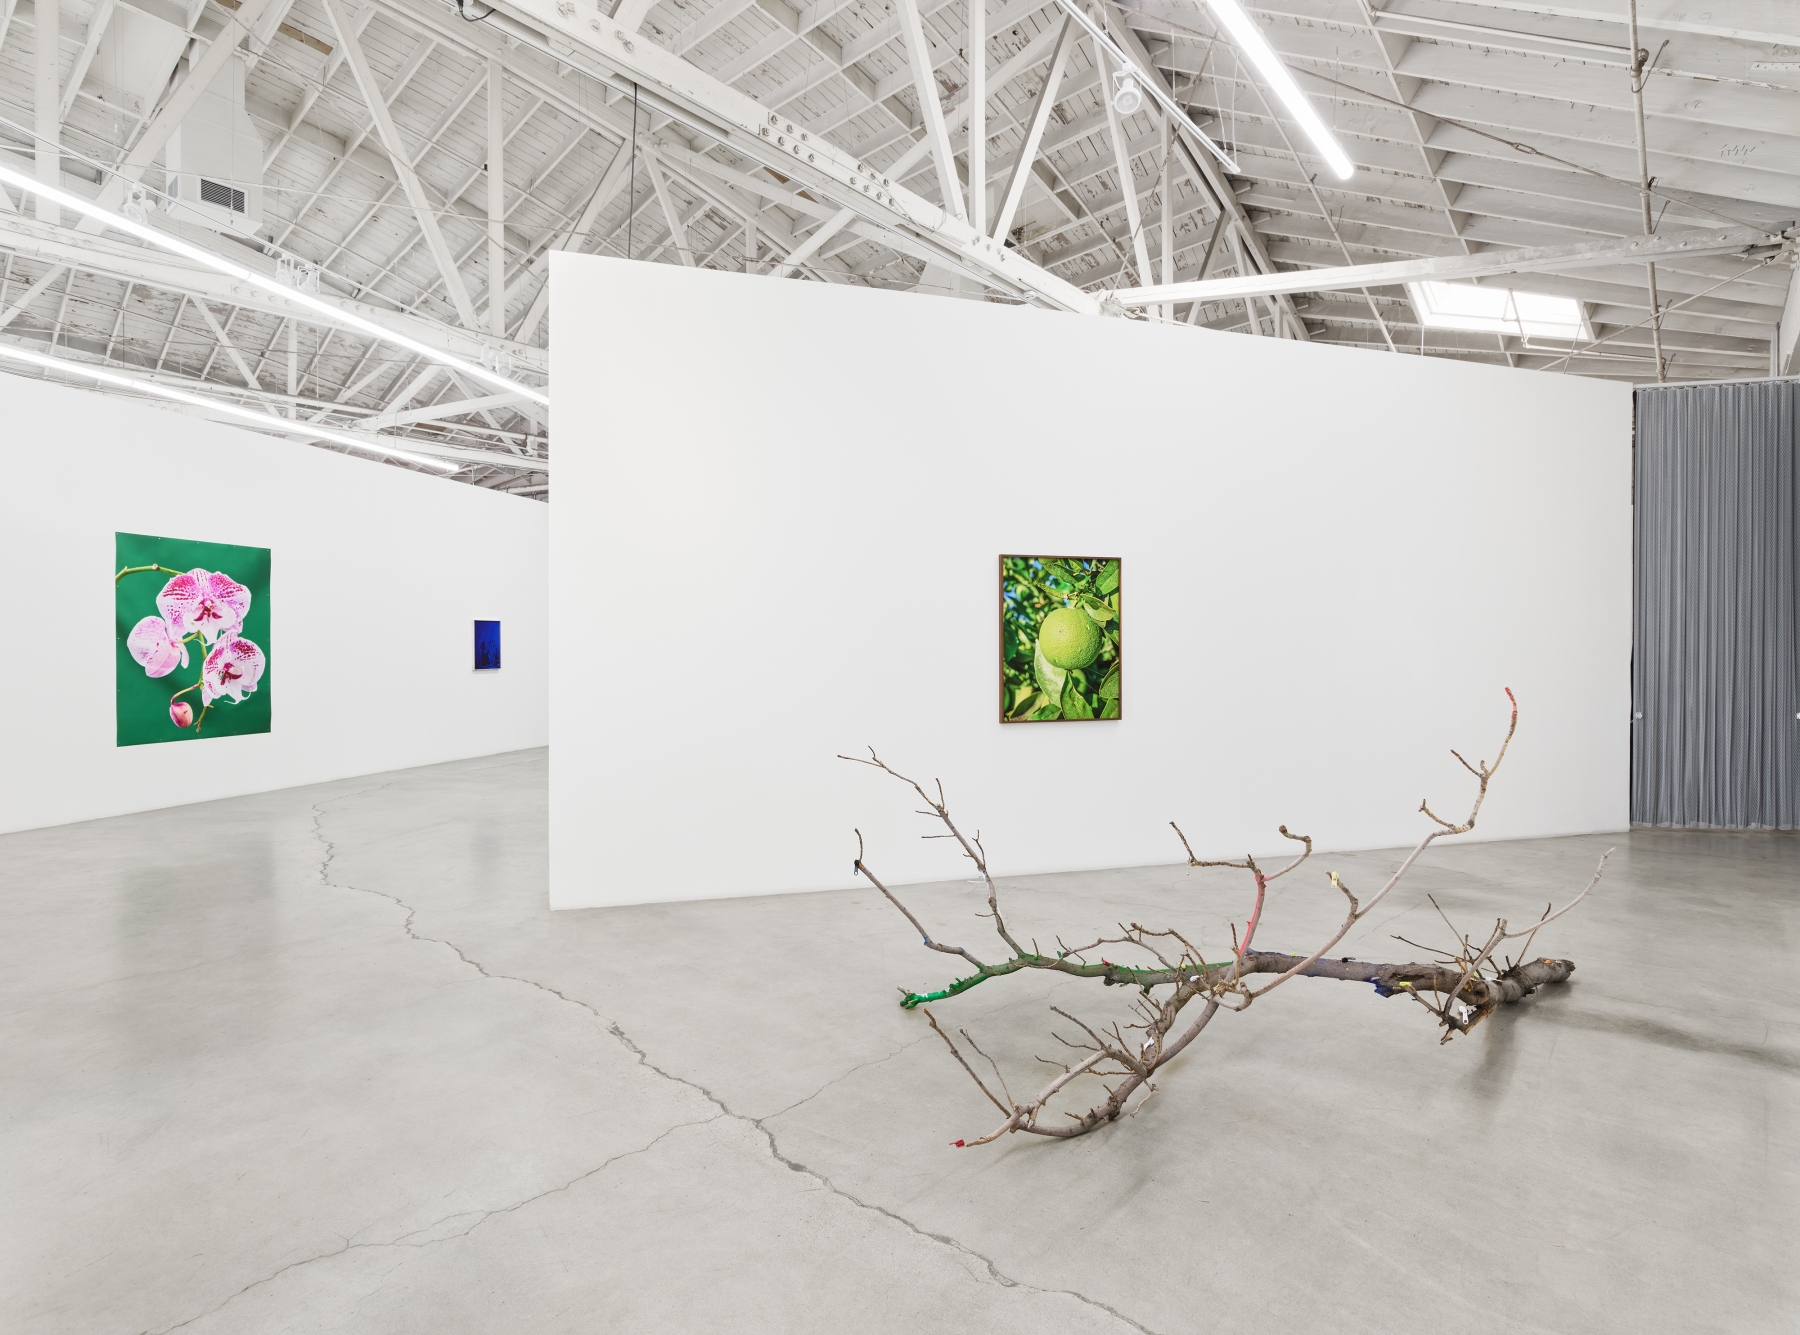 Awol Erizku,&nbsp;Scorched Earth, installation view, 2021